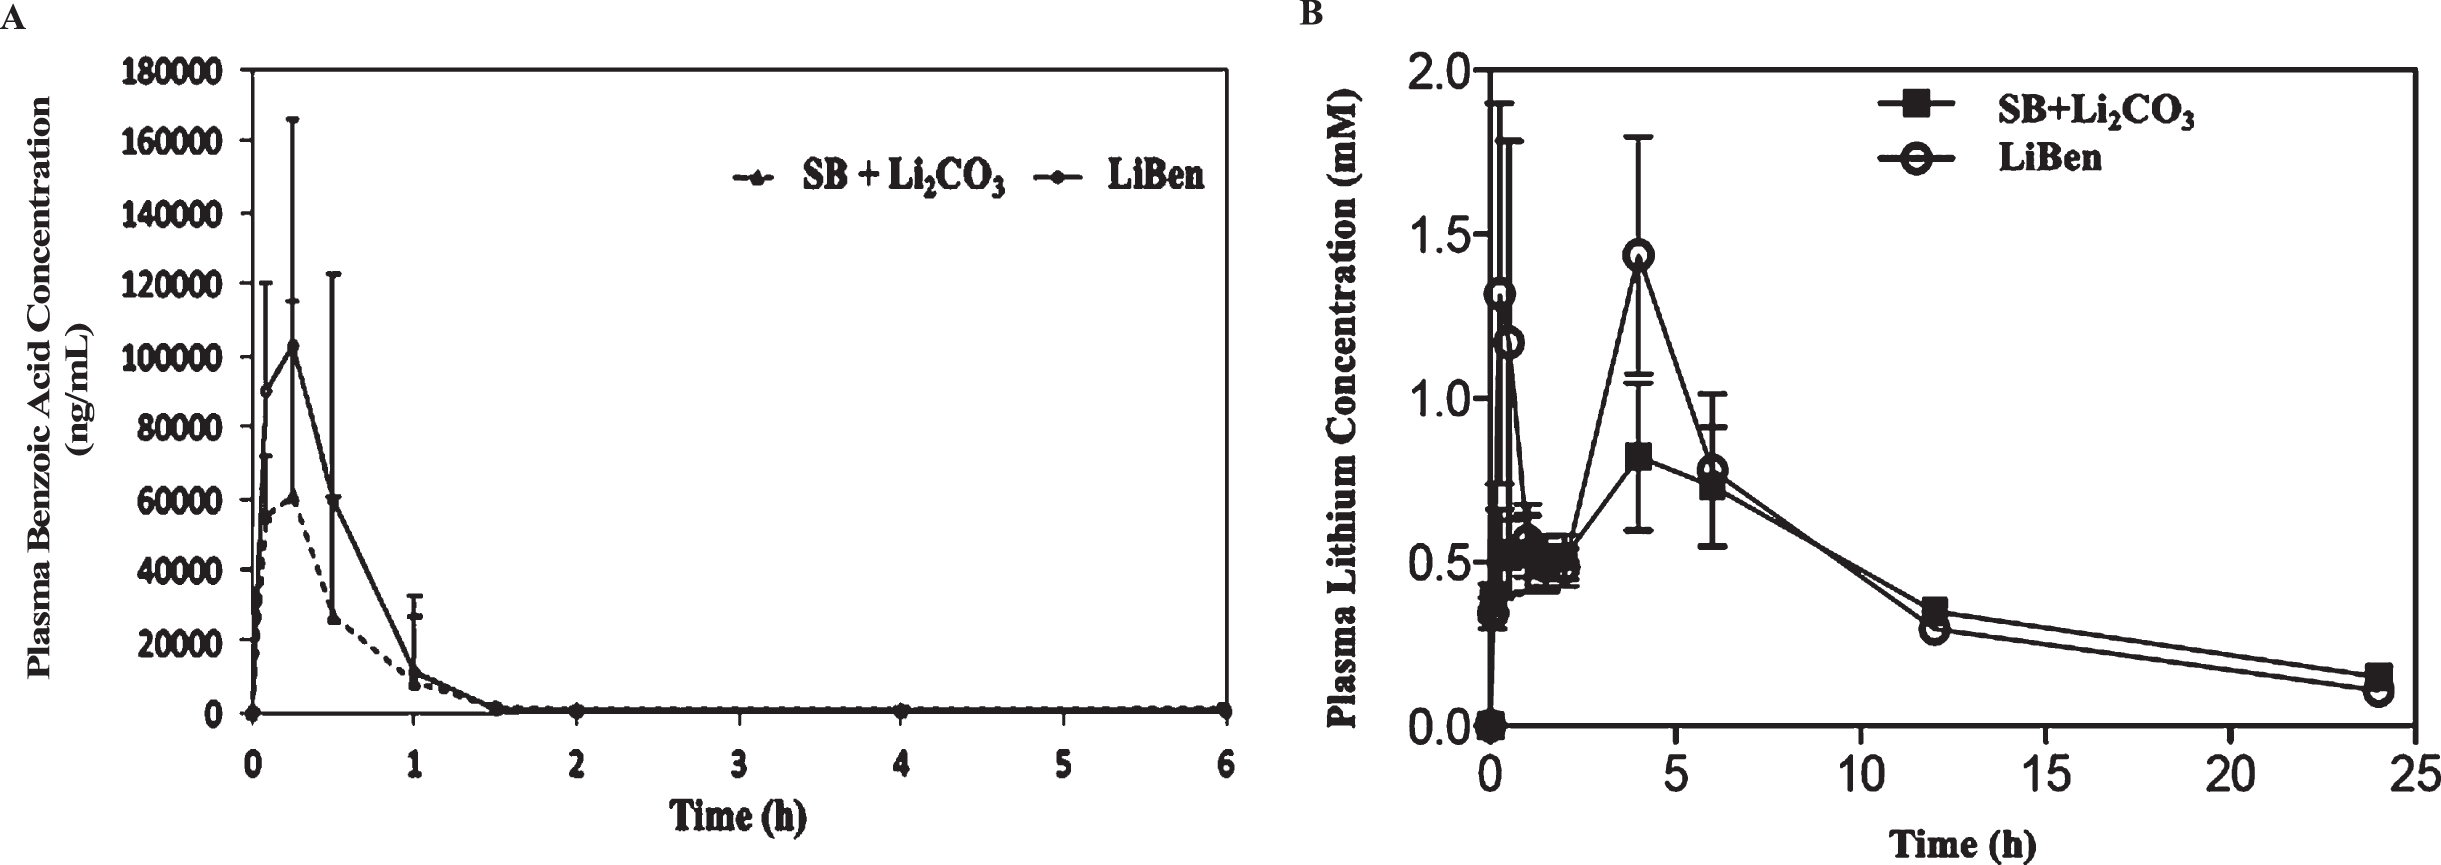 Plasma concentration-time profiles of benzoic acid and lithium. A) The mean plasma benzoic acid and B) lithium concentration changes over time after a single oral administration of lithium benzoate (LiBen; 255.3 mg/kg) or the mixture of sodium benzoate (SB; 287.9 mg/kg) and lithium carbonate (Li2CO3; 74.2 mg/kg). Data were presented as mean±SD from N = 6 for each experiment condition.